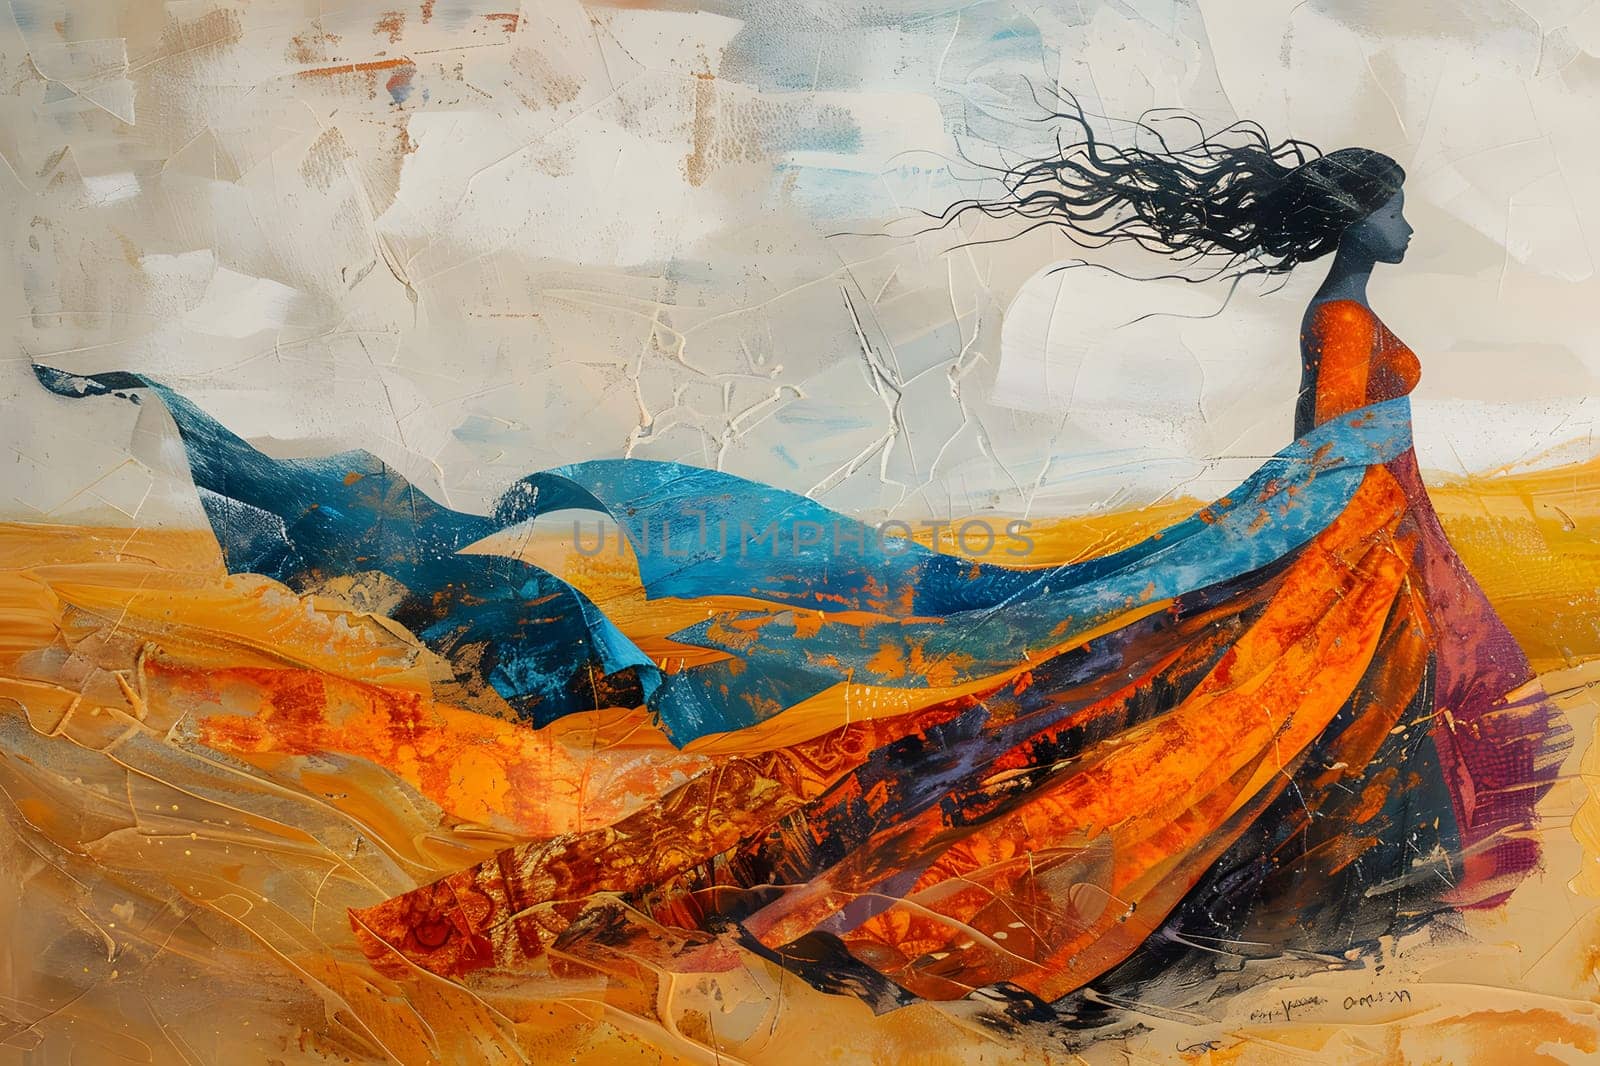 A colorful painting of a woman in a vibrant orange and blue dress, beautifully captured on canvas with watercolor paint